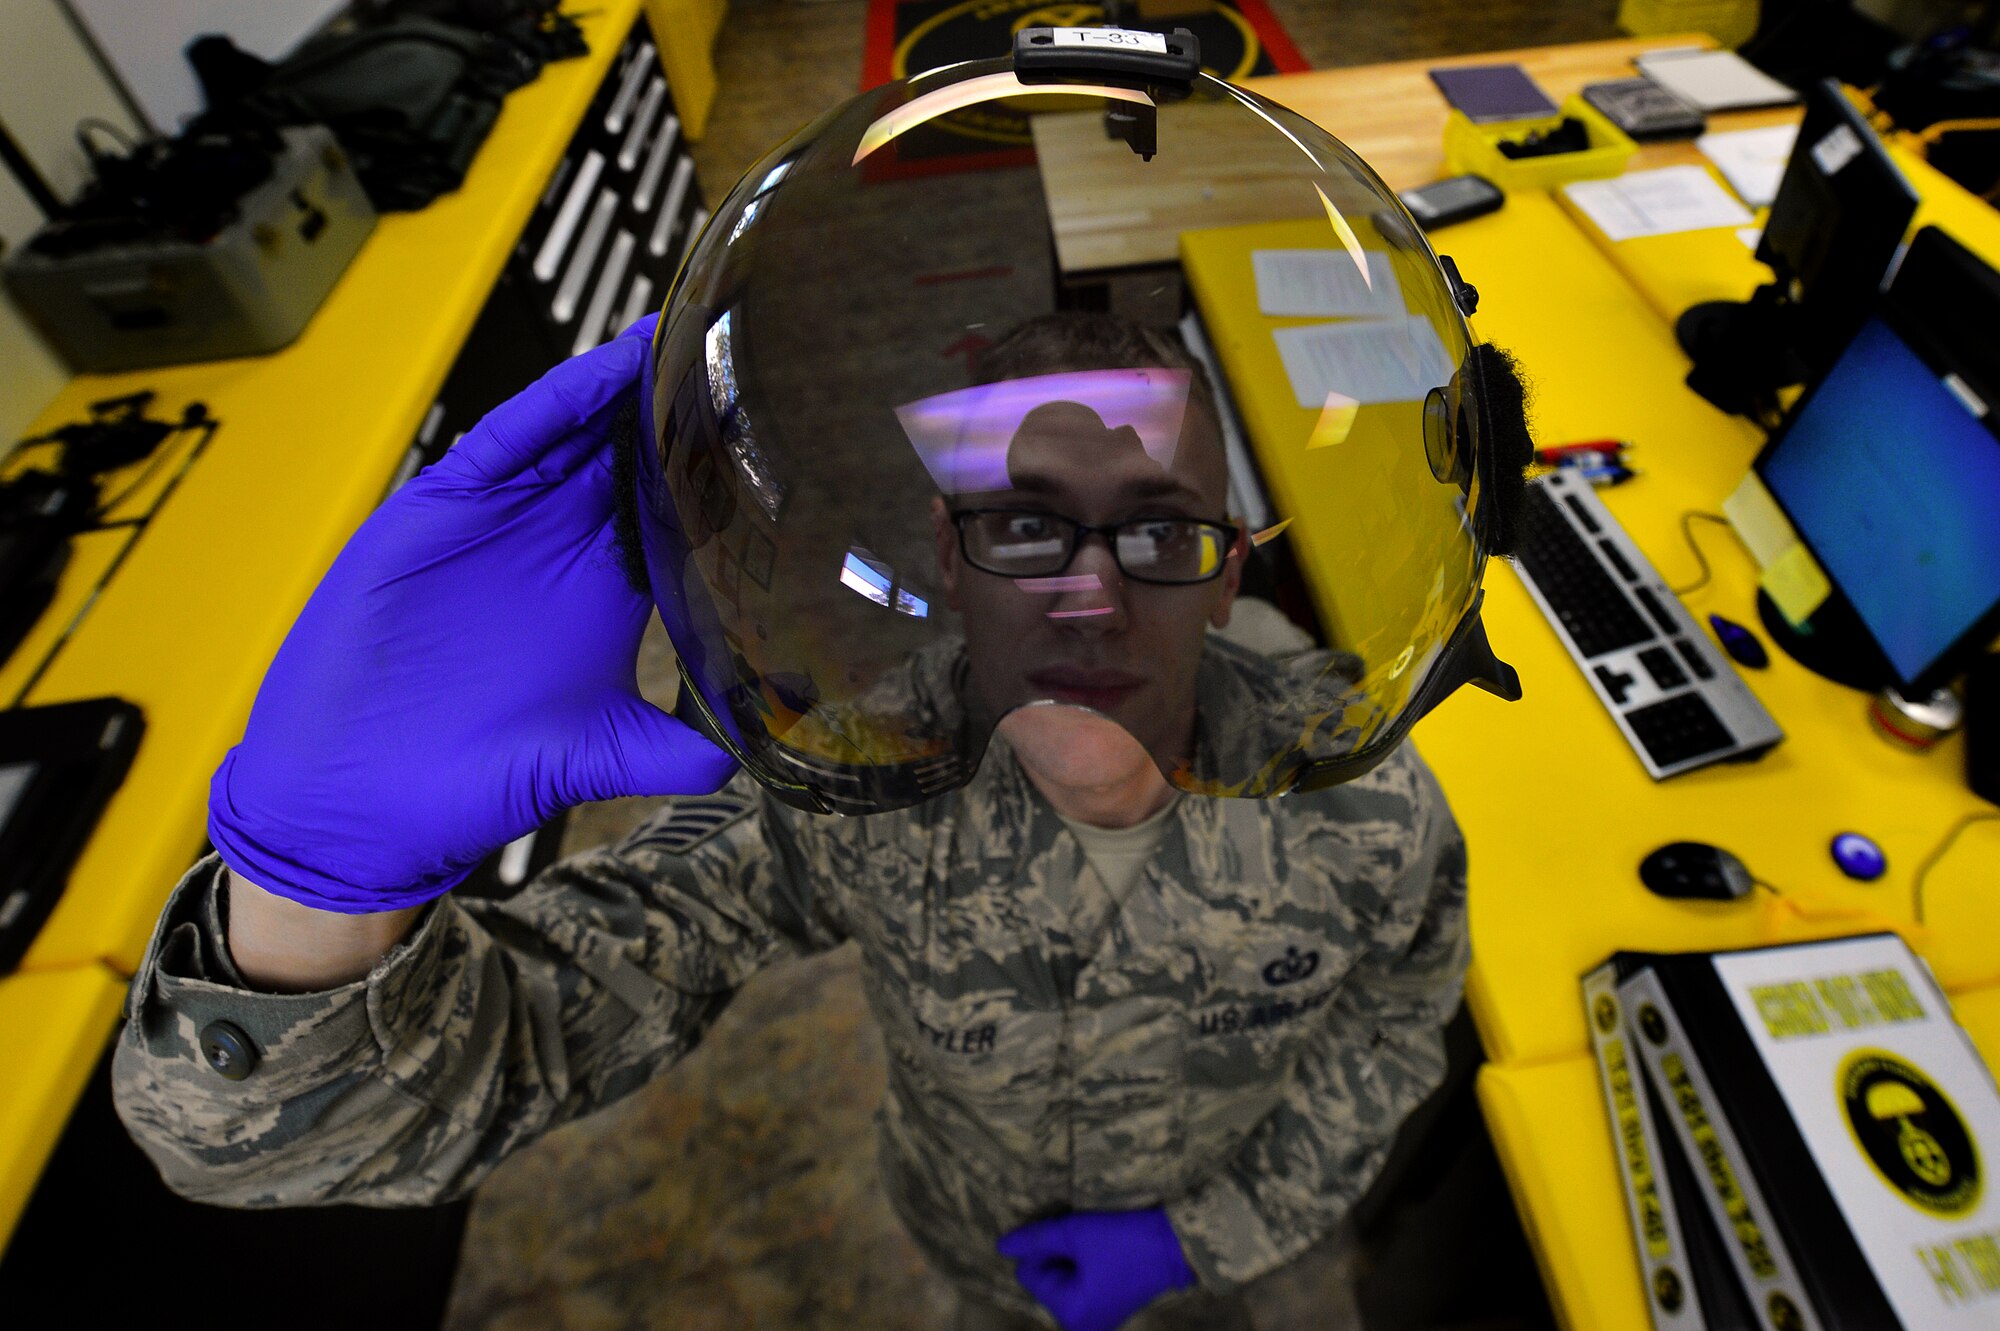 U.S. Air Force Staff Sgt. Anthony Tyler, 20th Operations Support Squadron aircrew flight equipment specialist, inspects the visor of a pilot’s helmet at Shaw Air Force Base, S.C., Oct. 21, 2015. Tyler has to inspect the visor for scratches and damage to ensure the pilots vision isn’t obscured during flight. (U.S. Air Force photo by Senior Airman Michael Cossaboom)